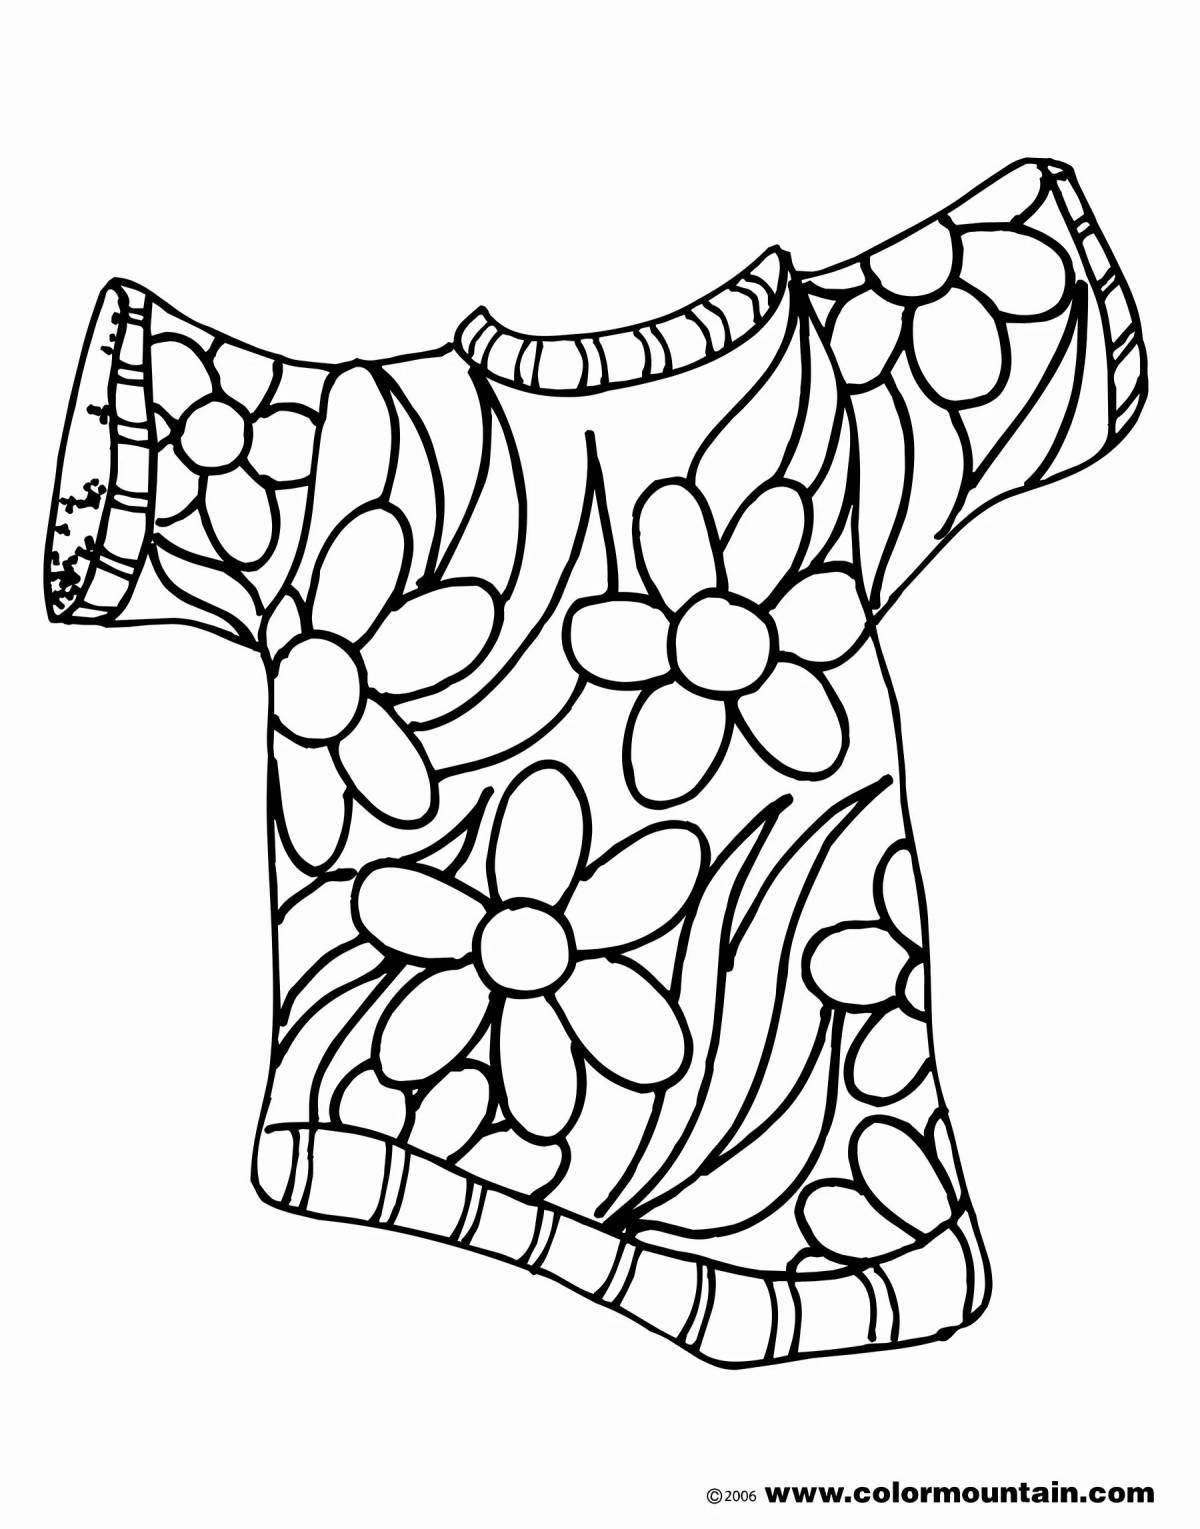 Fun coloring book with shirts for 4-5 year olds